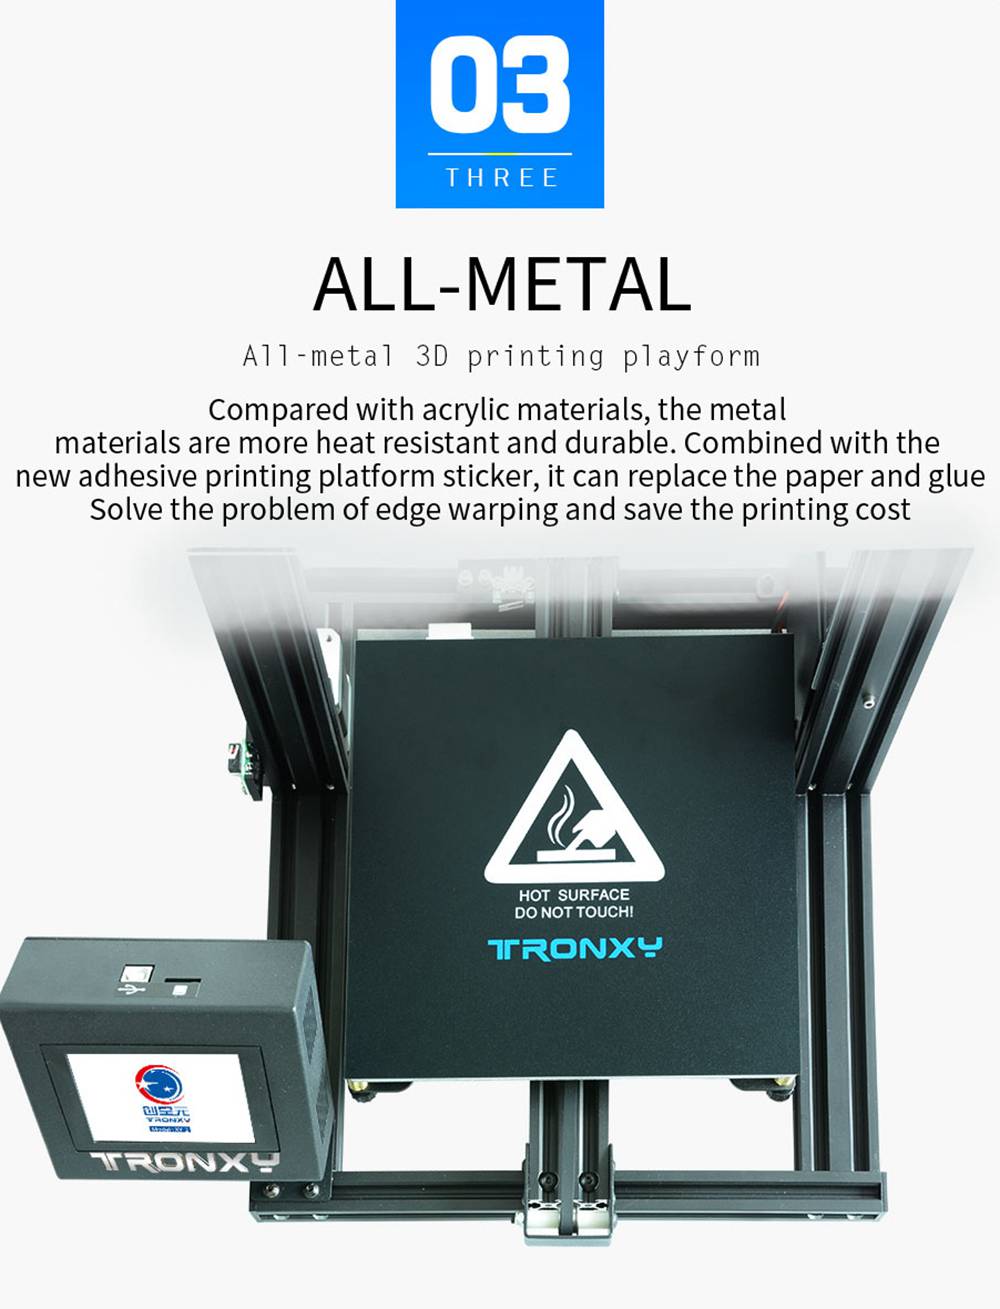 TRONXY XY-2 3.5'' Touch Screen 3D Printer 220*220*260mm Automatic Alignment Continuous Printing USB - Black